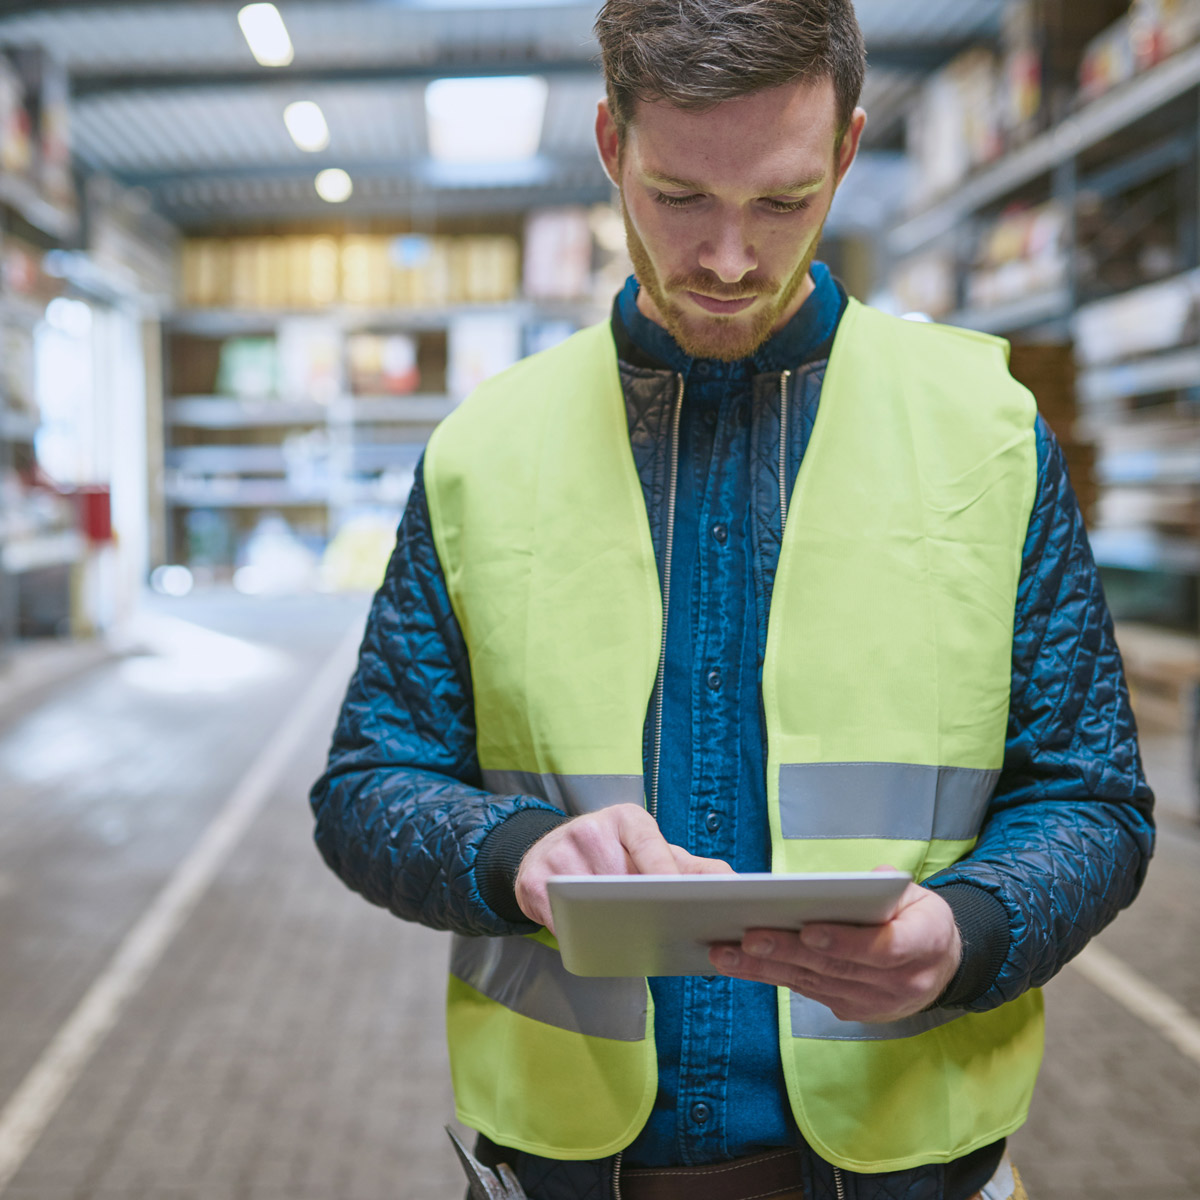 Man in high visibility vest reviewing a tablet inside a warehouse.